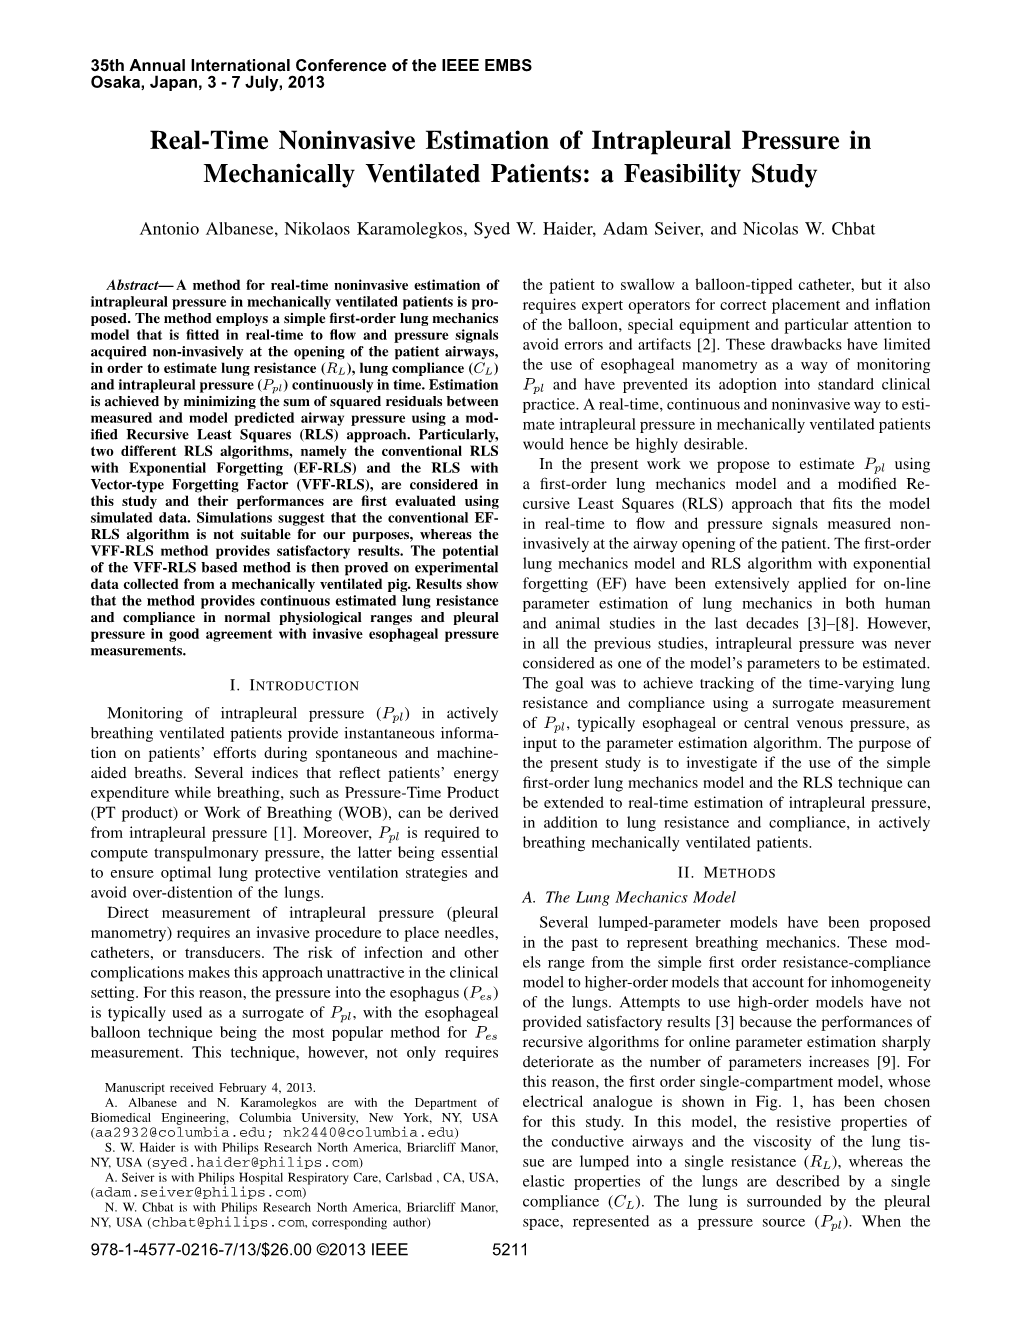 Real-Time Noninvasive Estimation of Intrapleural Pressure in Mechanically Ventilated Patients: a Feasibility Study